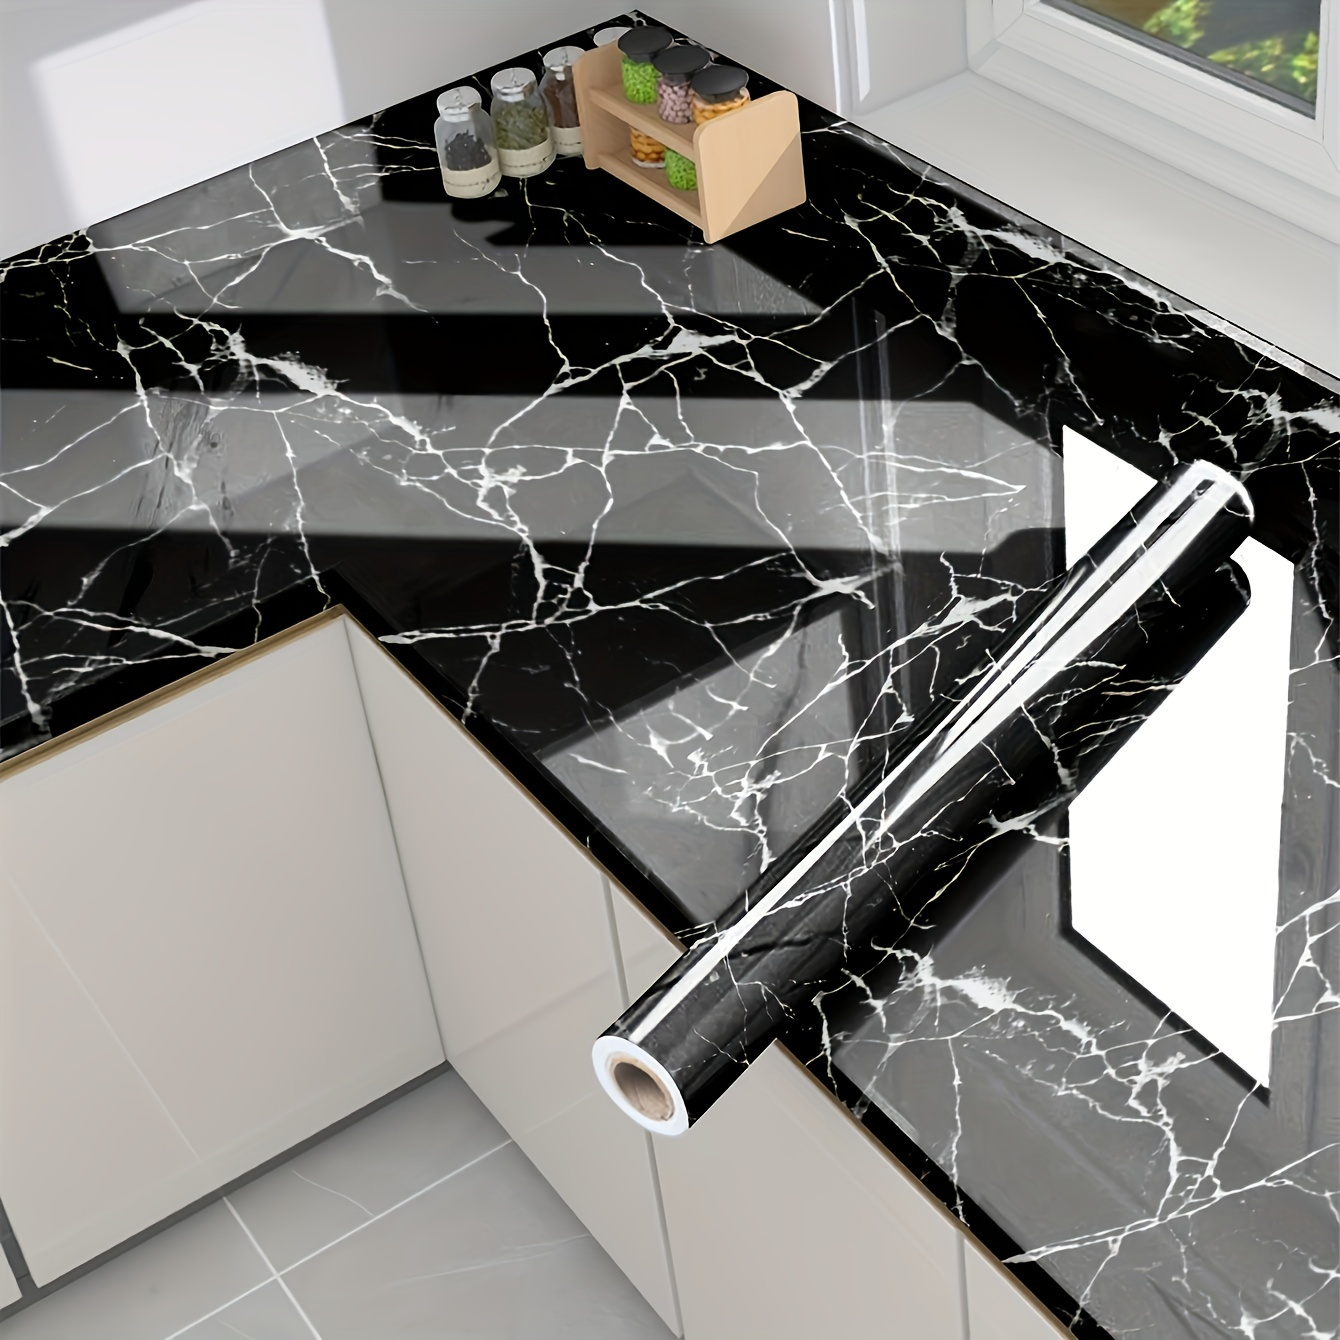 

Black Marble Self-adhesive Kitchen Wallpaper - Waterproof & Oil-resistant, Perfect For Stove, Countertops, Tiles, Cabinets & Dining Table Decor